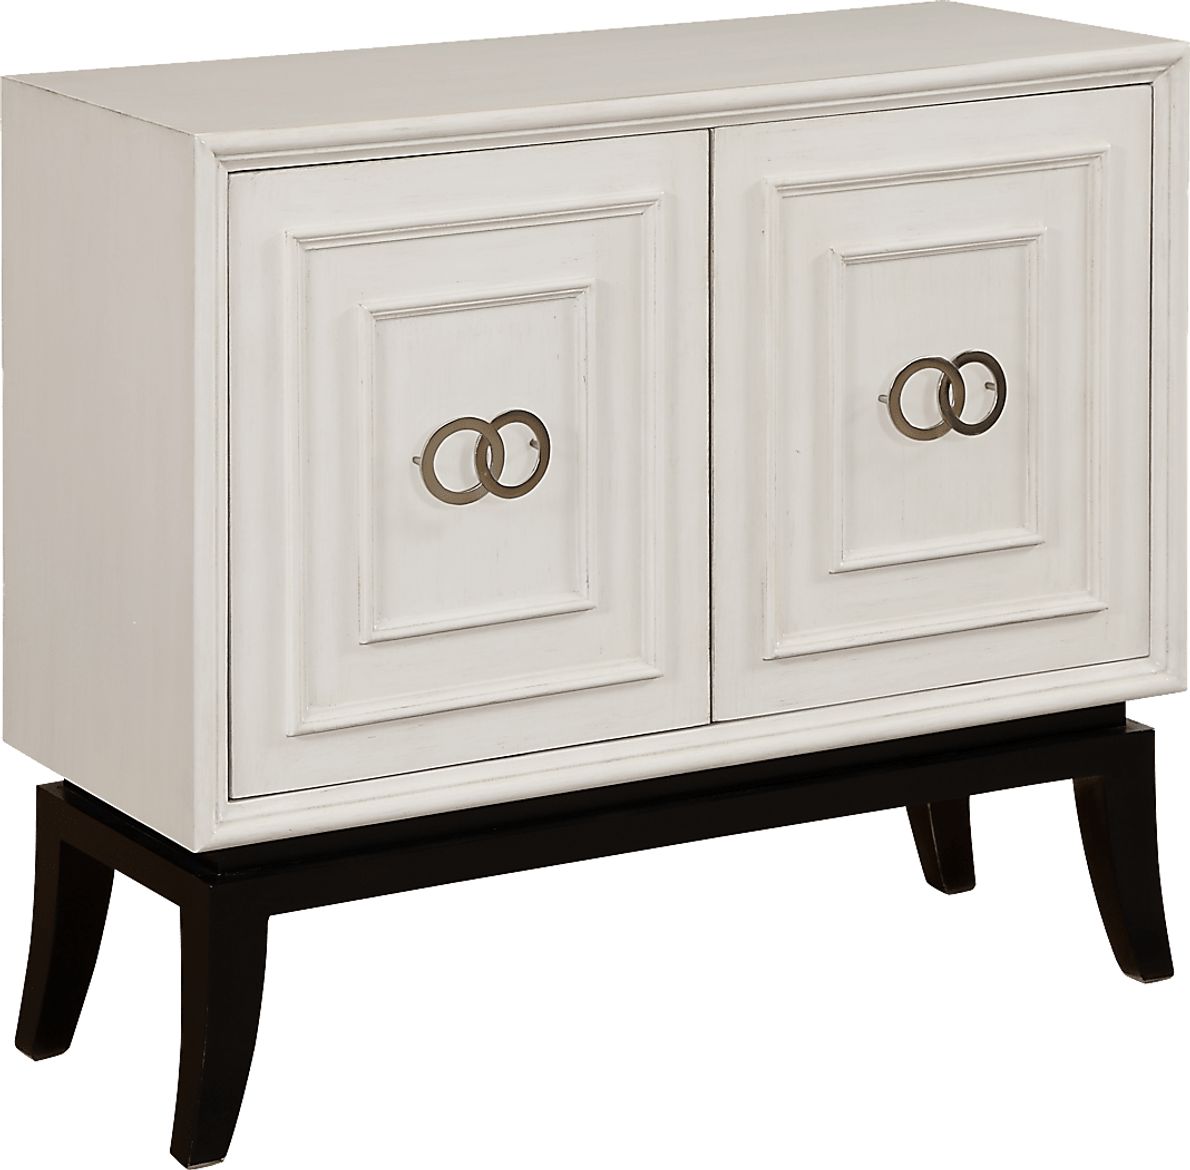 Katkay White Accent Cabinet